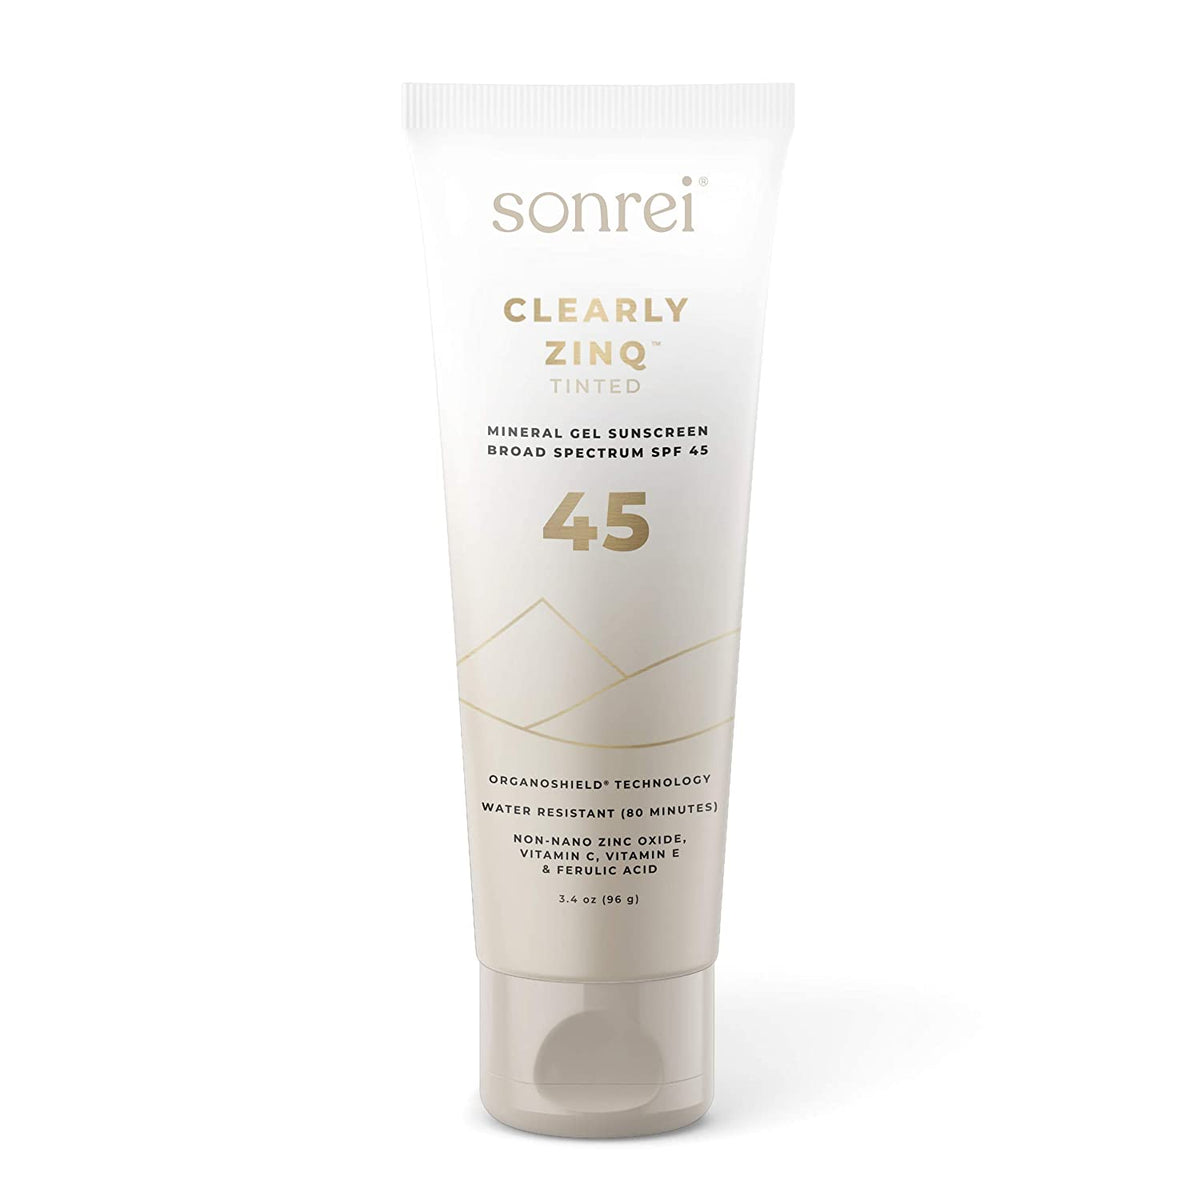 Clearly Zinq™ Tinted Mineral Gel Sunscreen SPF 45